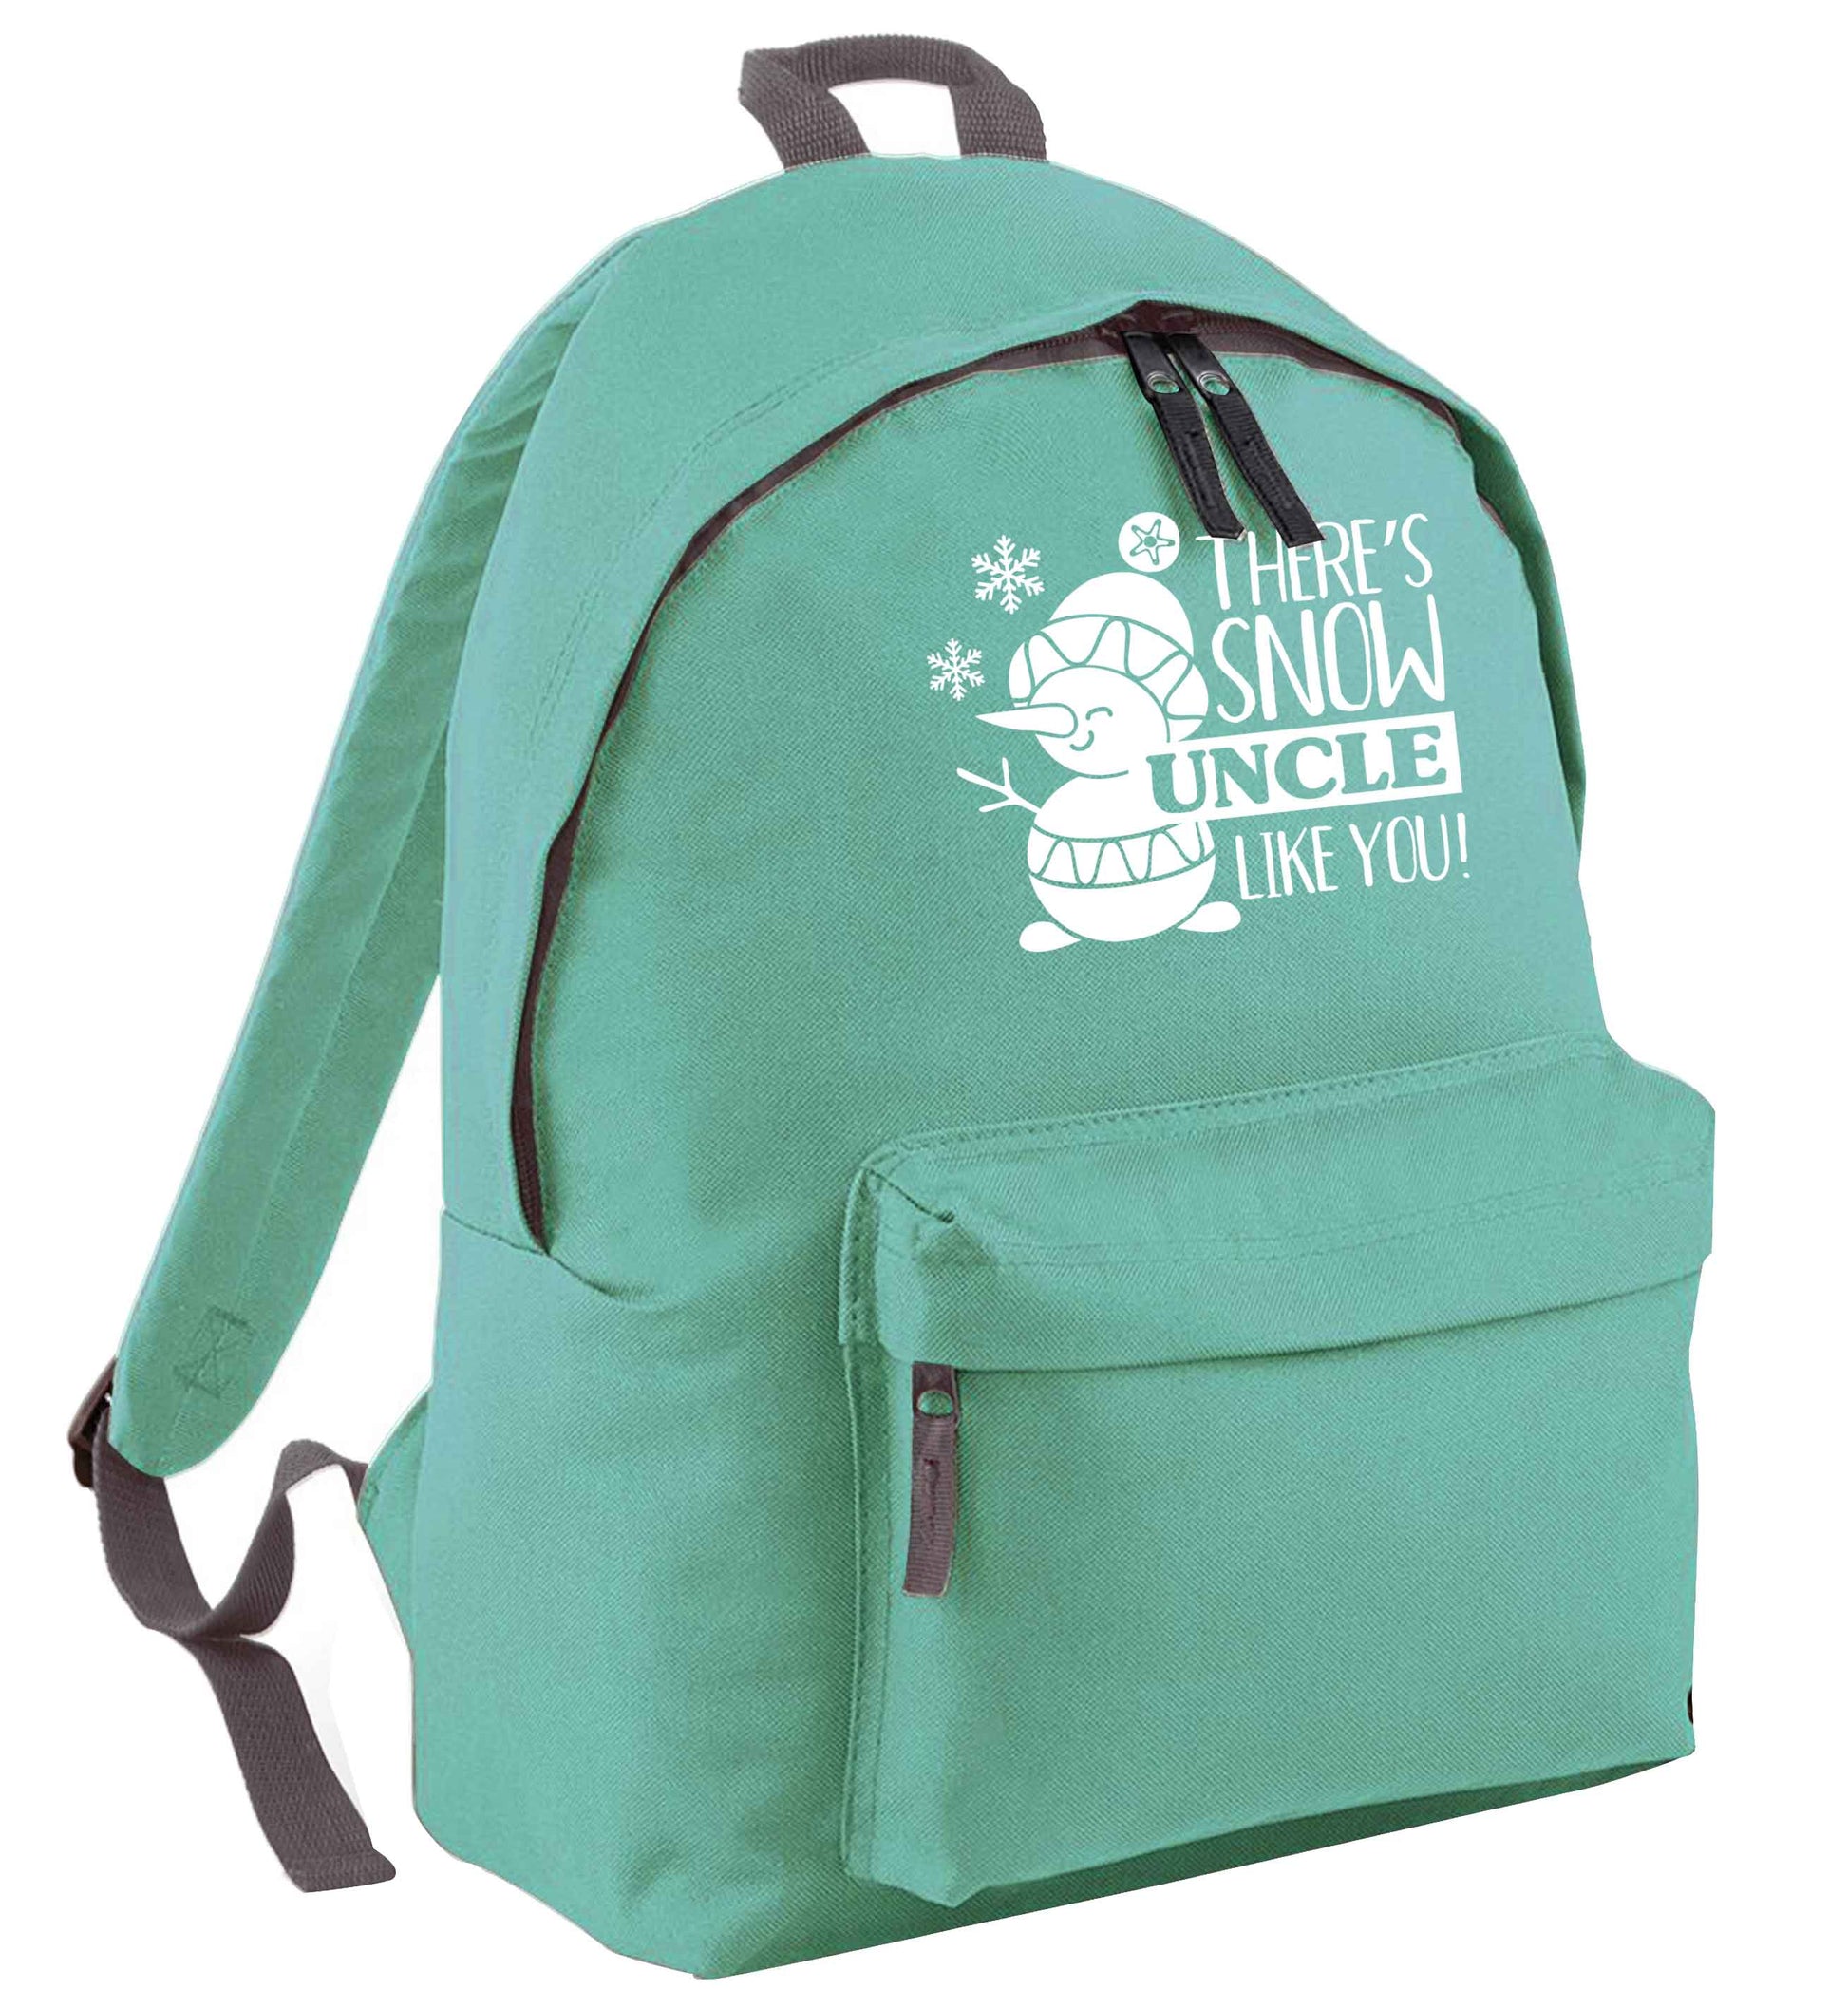 There's snow uncle like you mint adults backpack